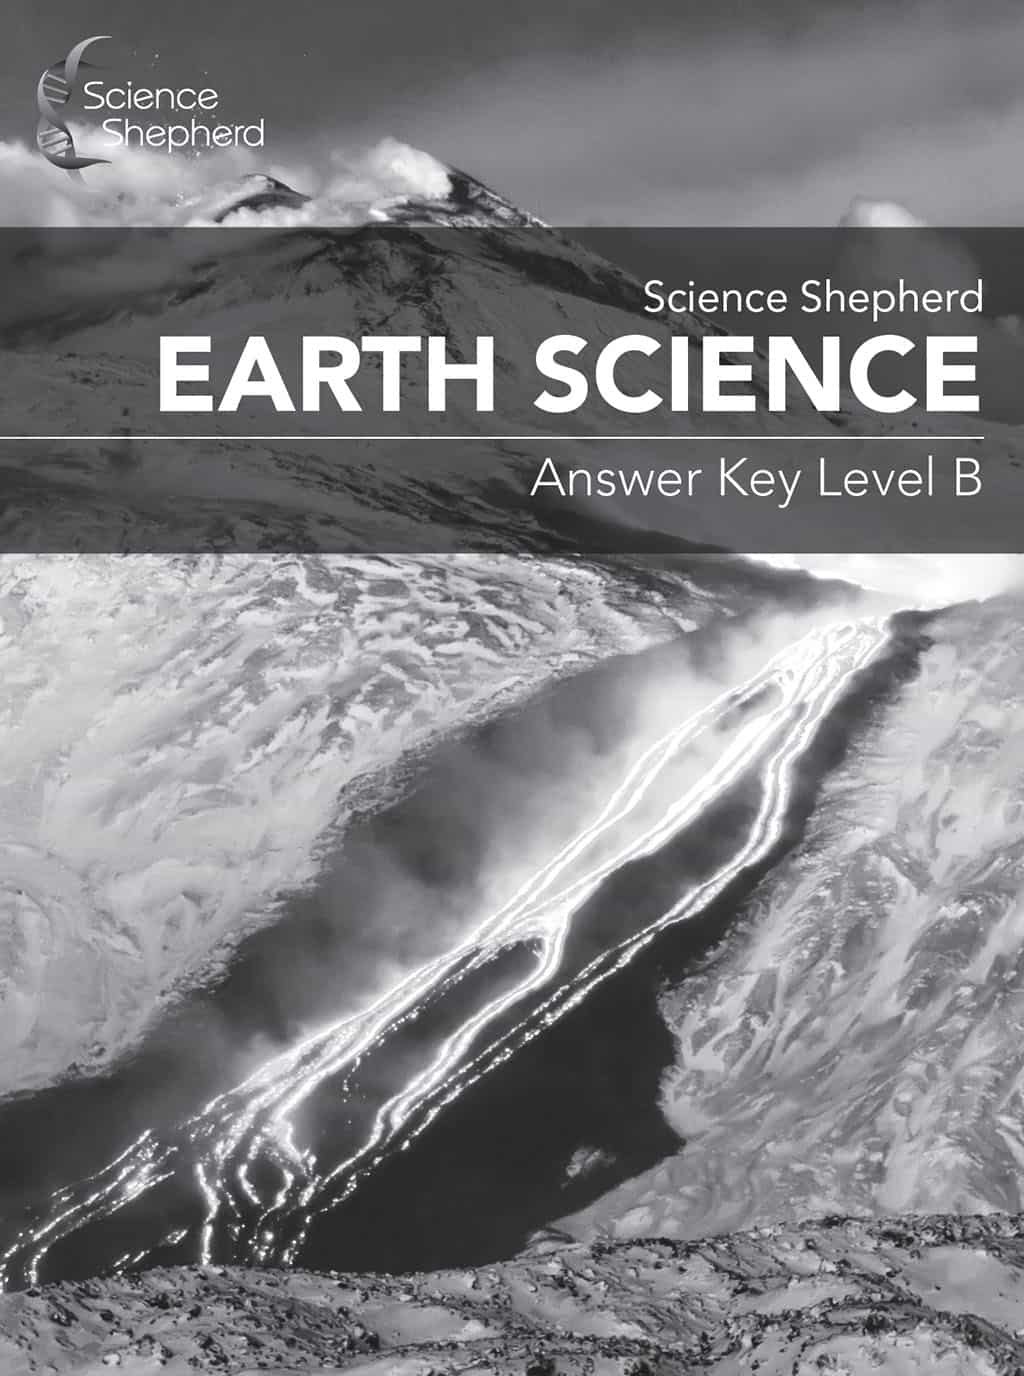 Earth Science homeschool curriculum answer key level b cover of a volcano erupting in grayscale